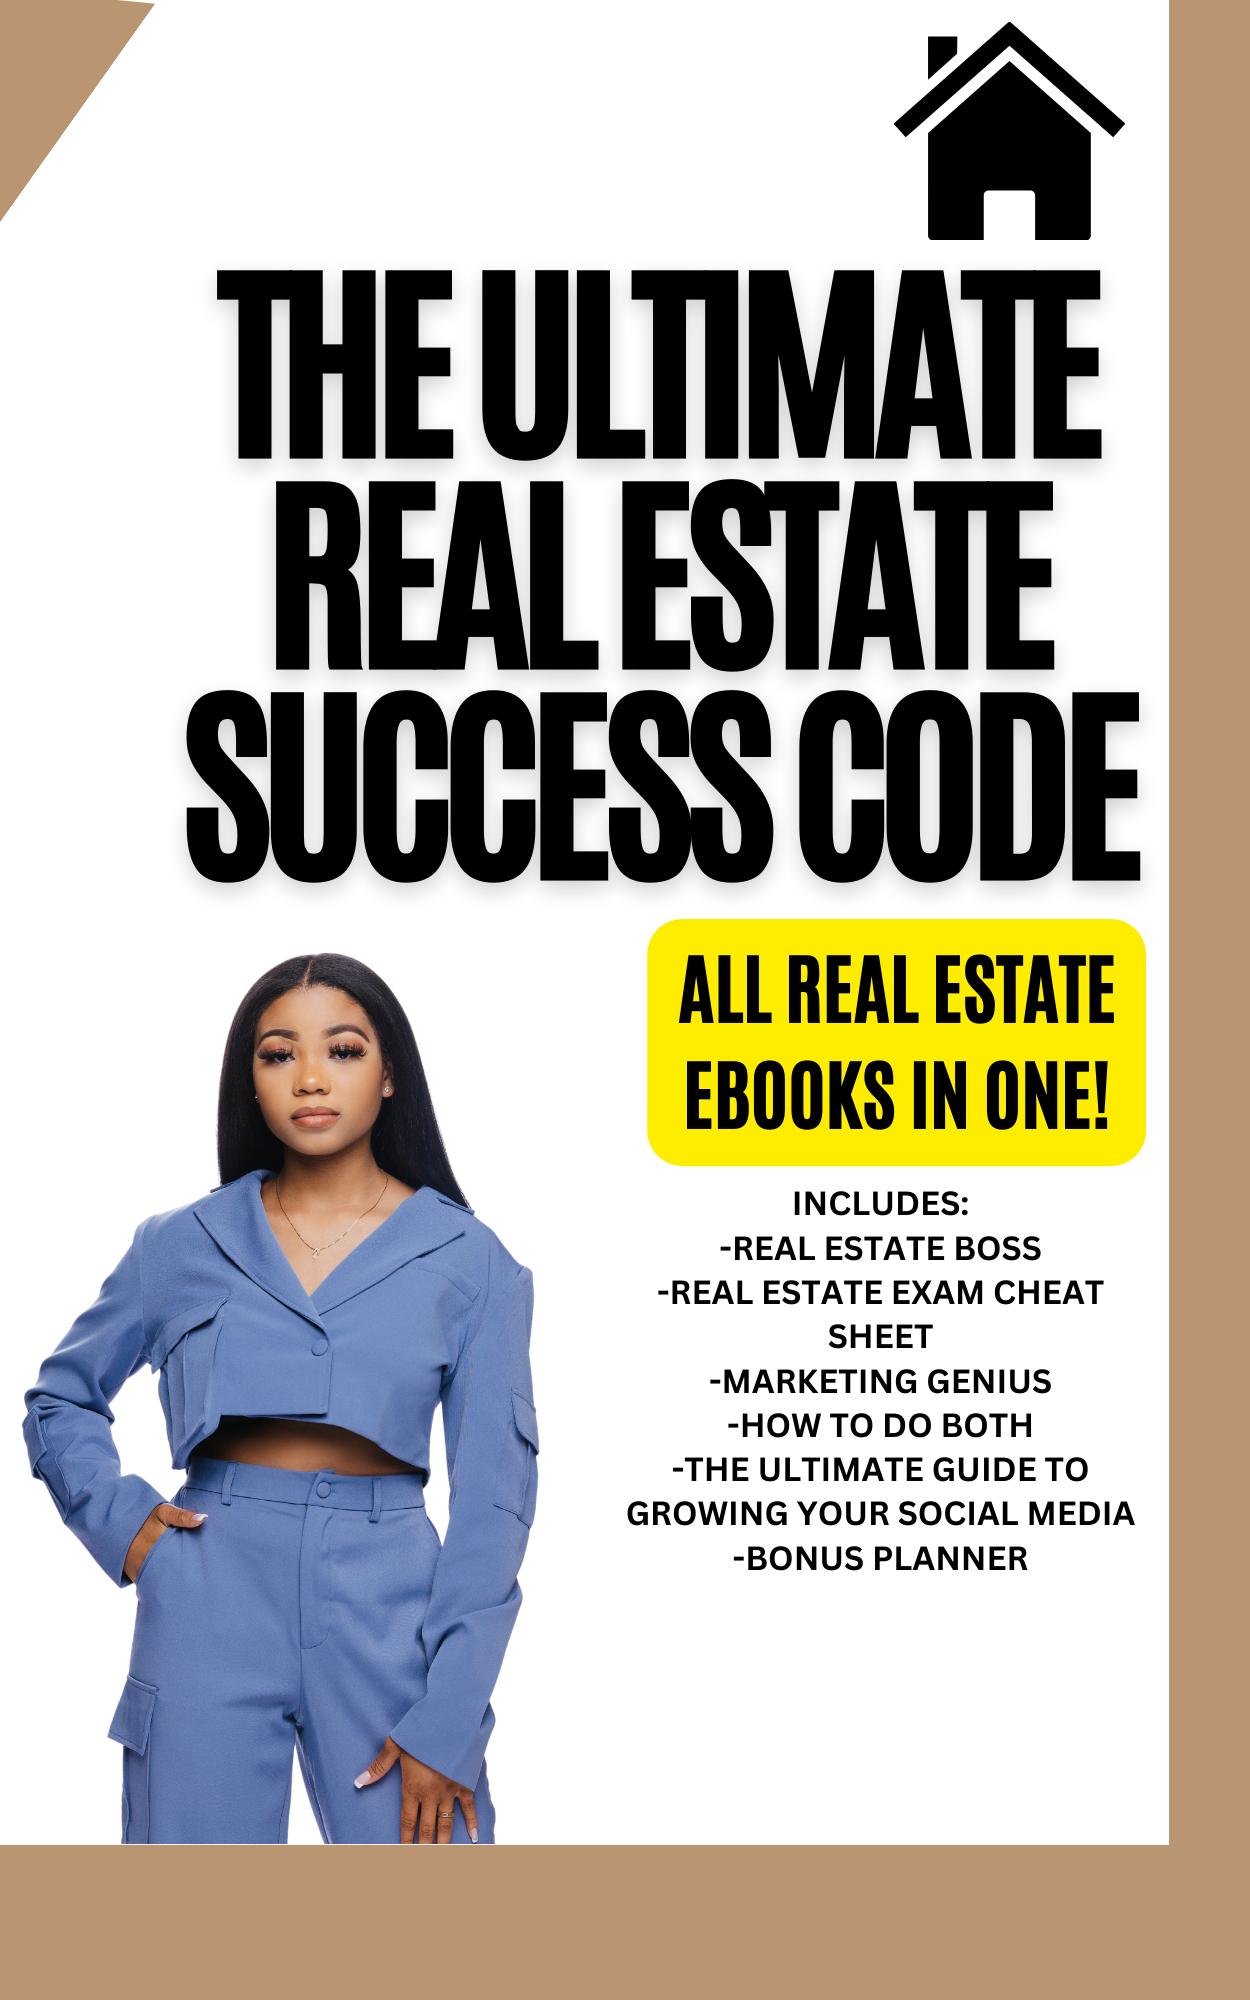 IN　ONE)　ULTIMATE　EBOOKS　(ALL　THE　CODE　SUCCESS　ESTATE　REAL　DIGITALS　–　SHAKVAULT